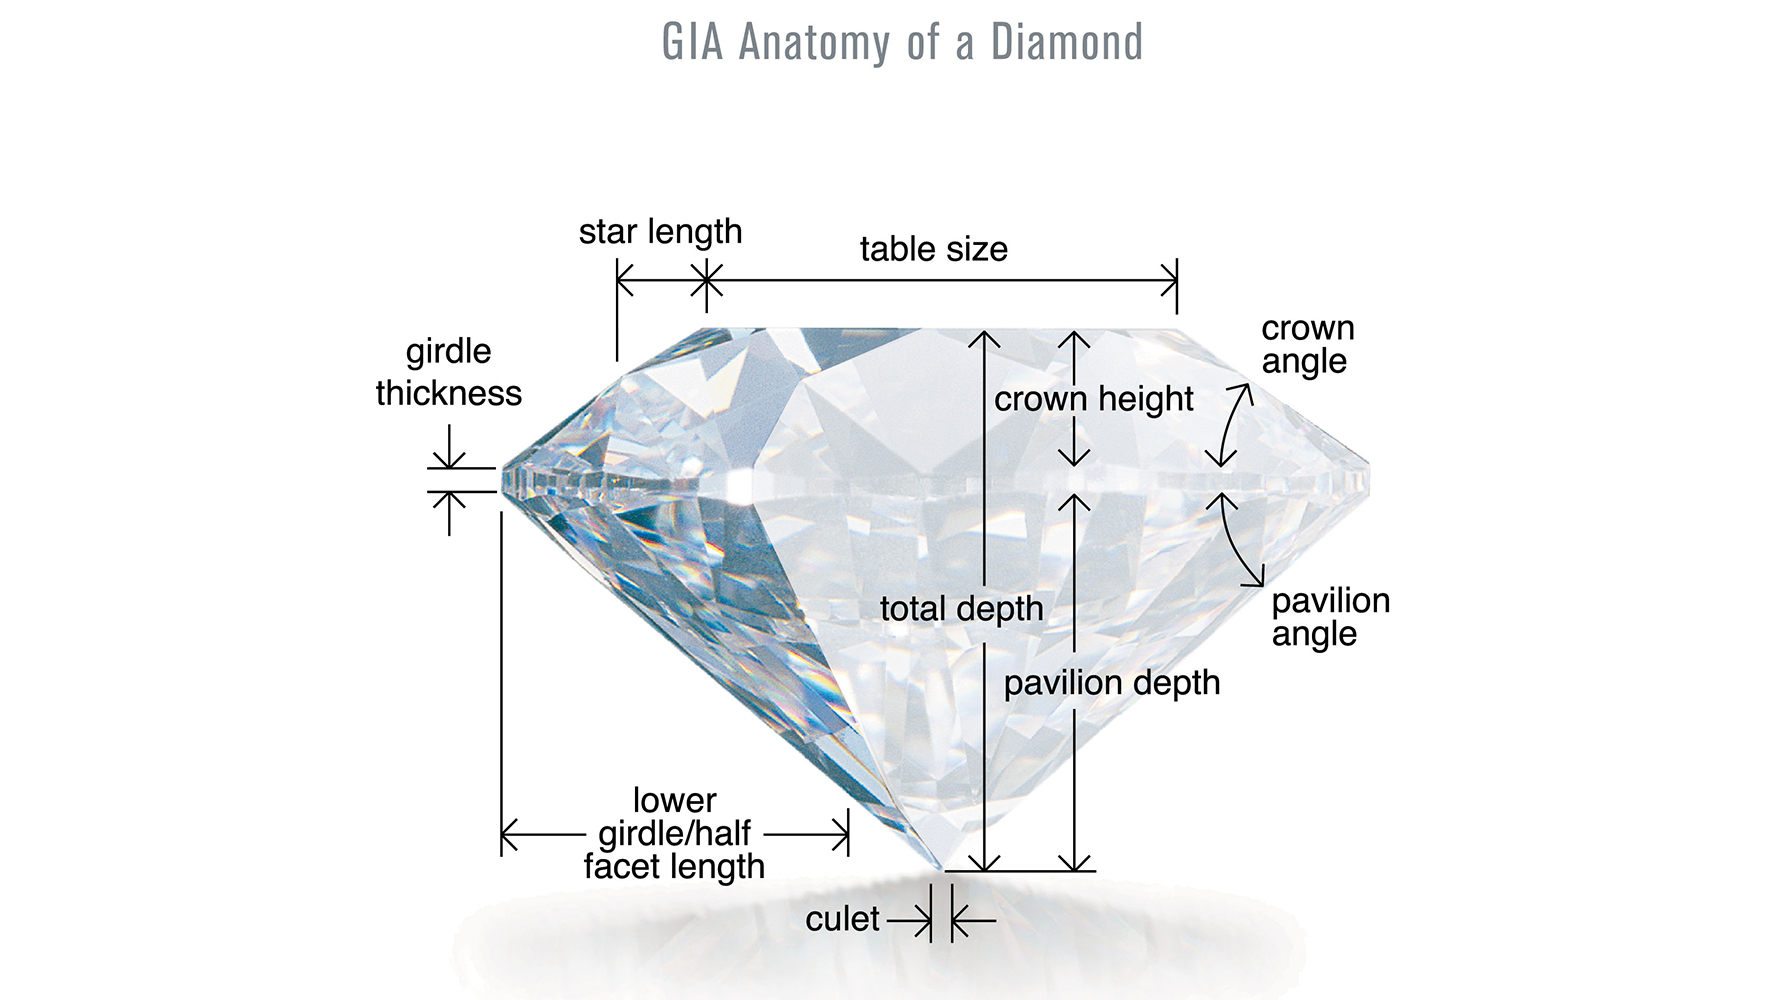 Learn How to Buy a Diamond with the GIA Diamond Buying Guide | 4Cs of Diamond Quality by GIA